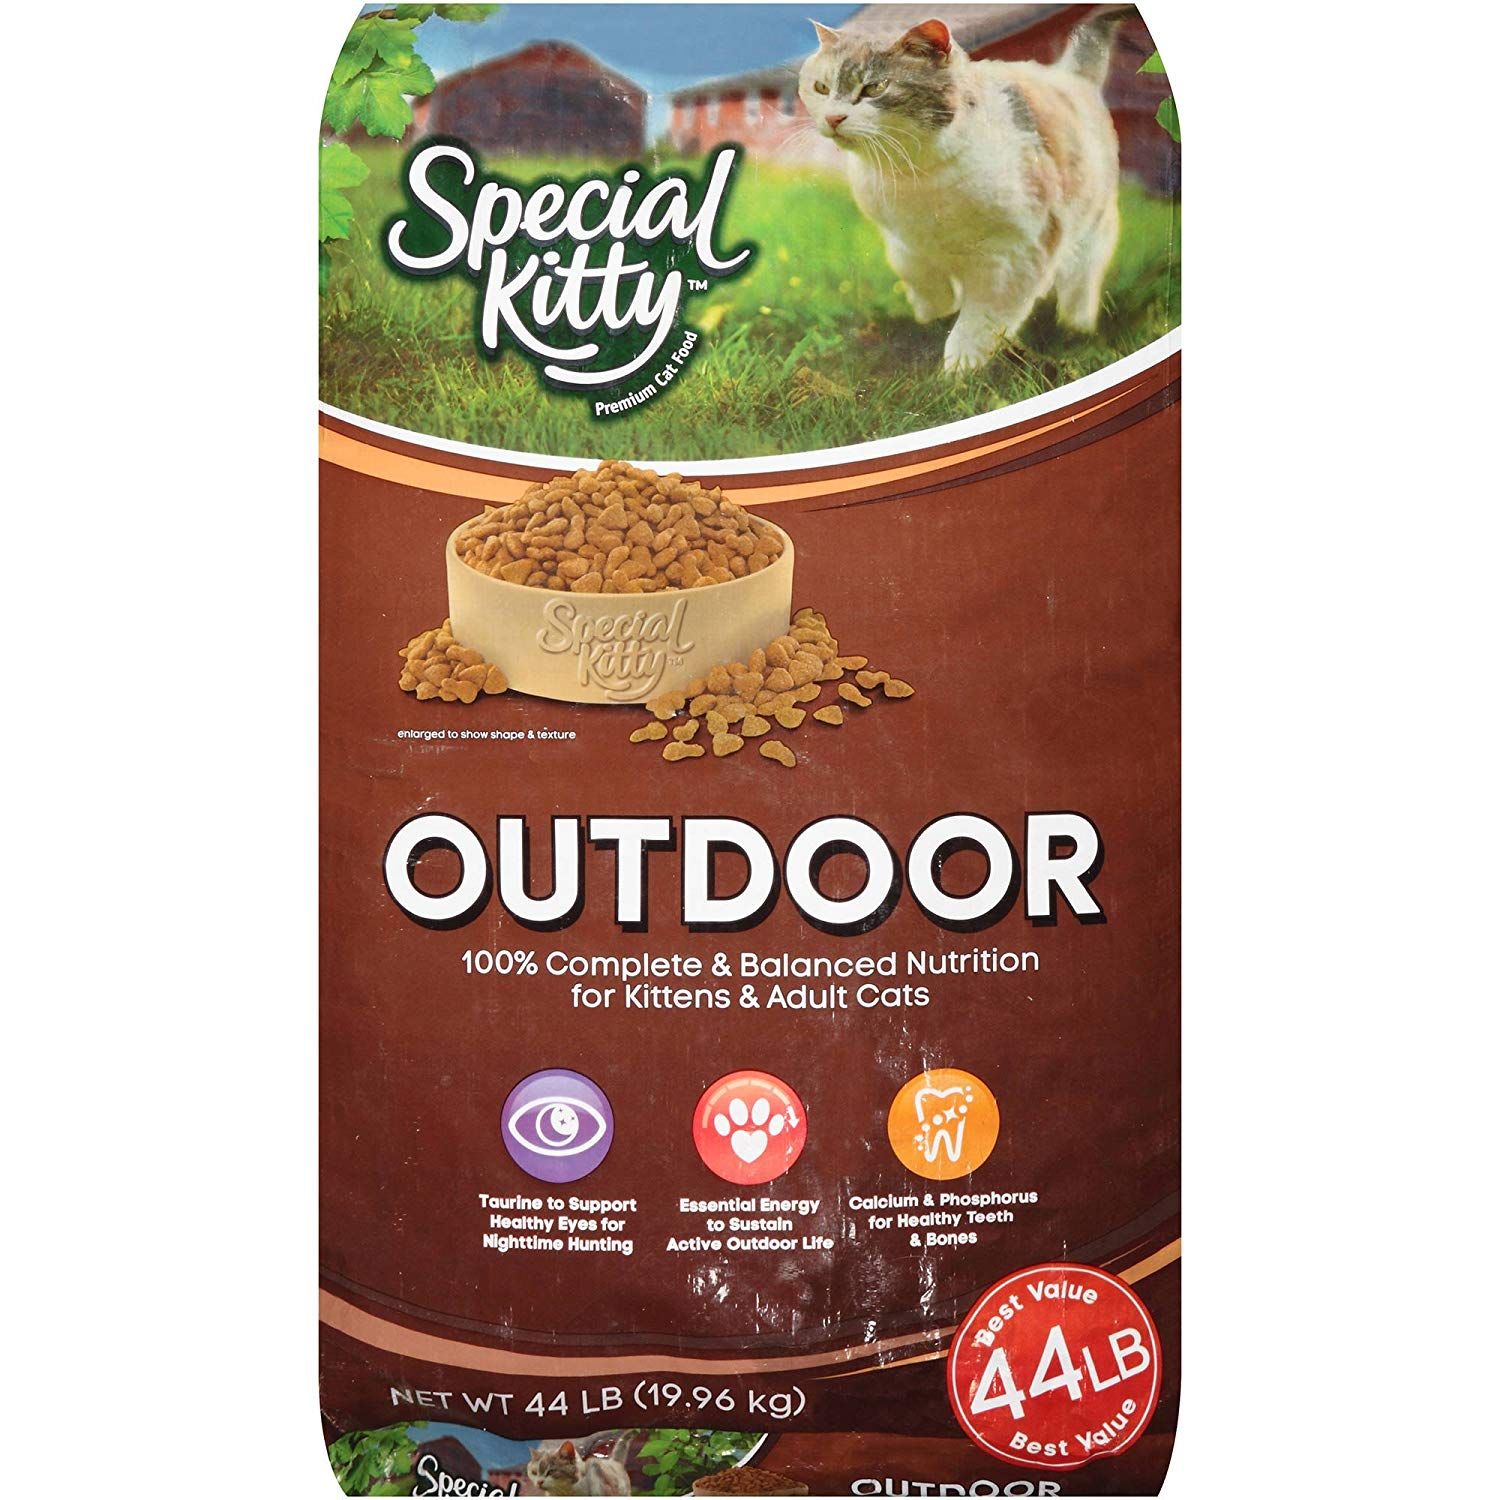 Special Kitty Outdoor Dry Cat Food, 44 lb ** Many thanks ...